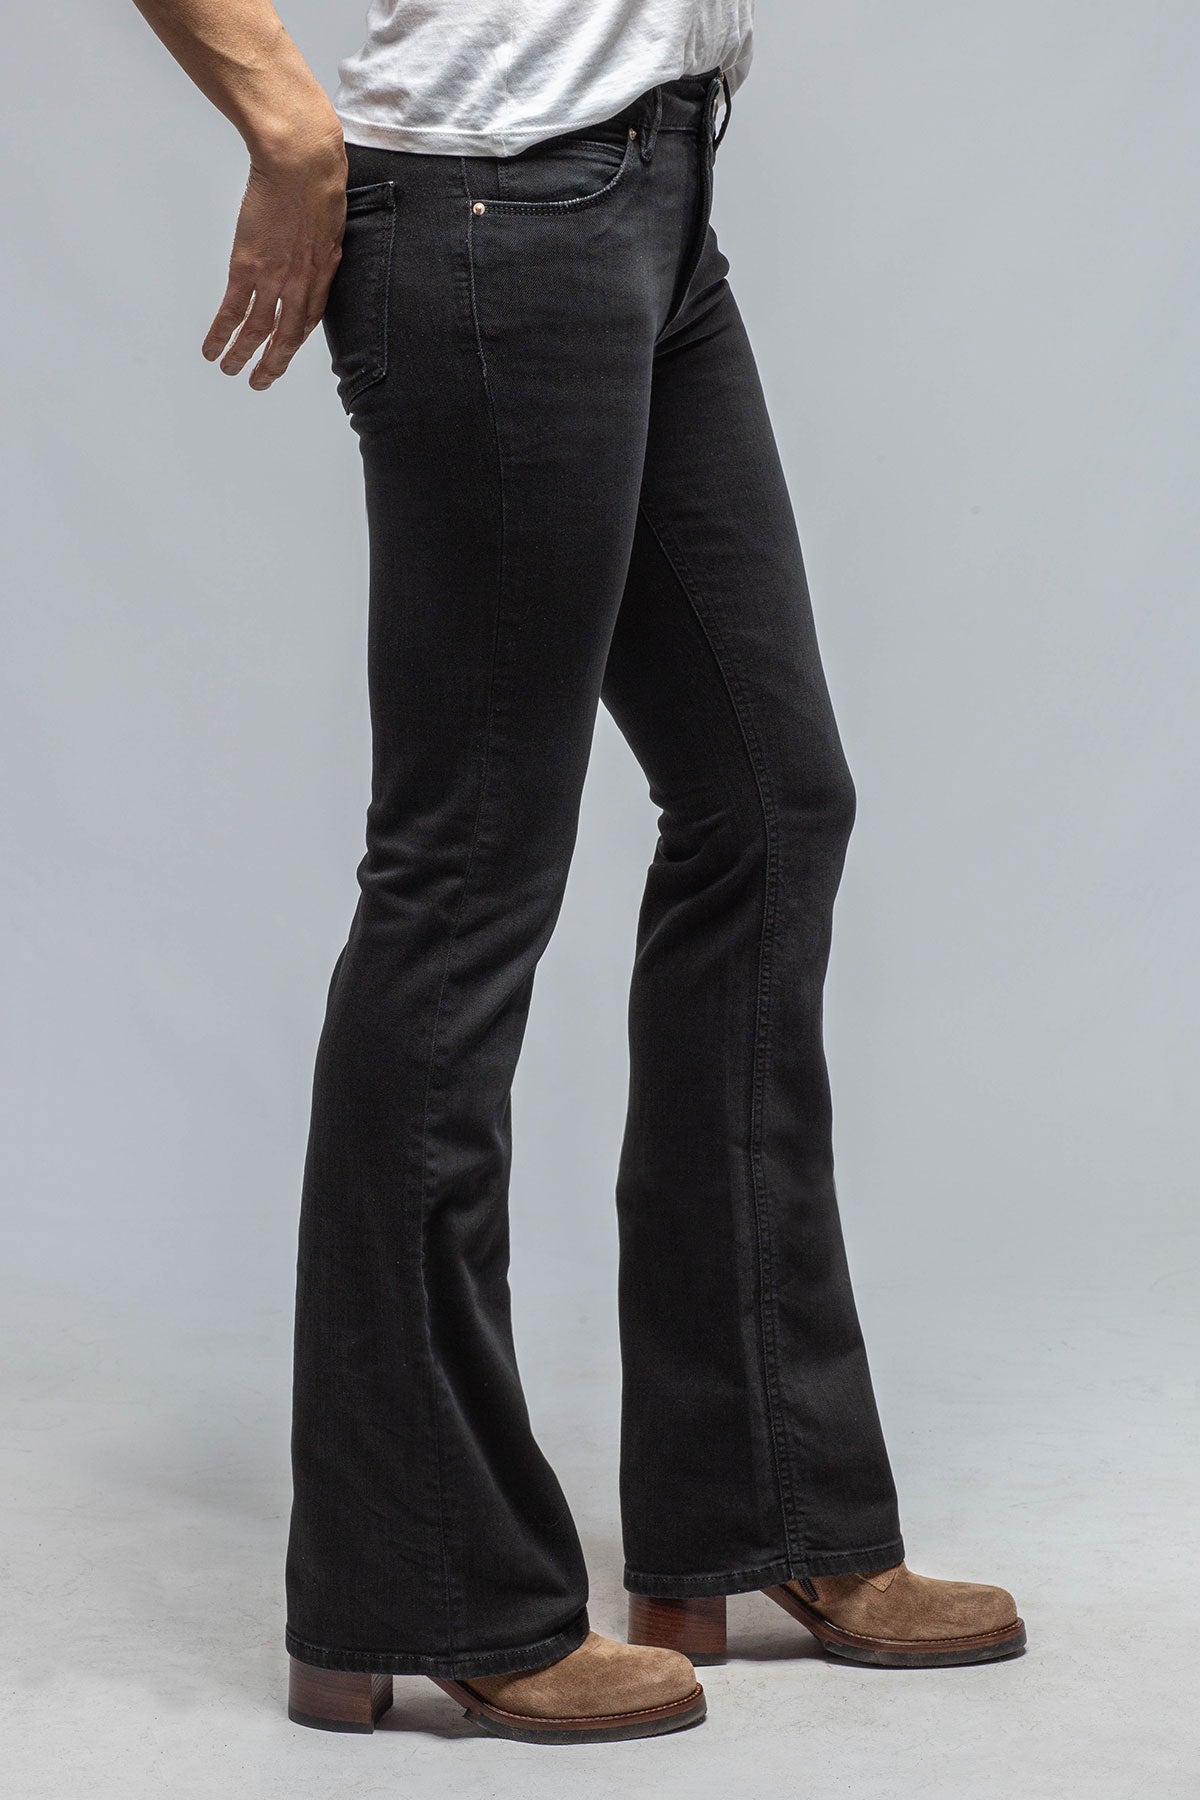 Tommy Flare Jeans In Washed Black | Ladies - Pants - Jeans | Axels Premium Denim